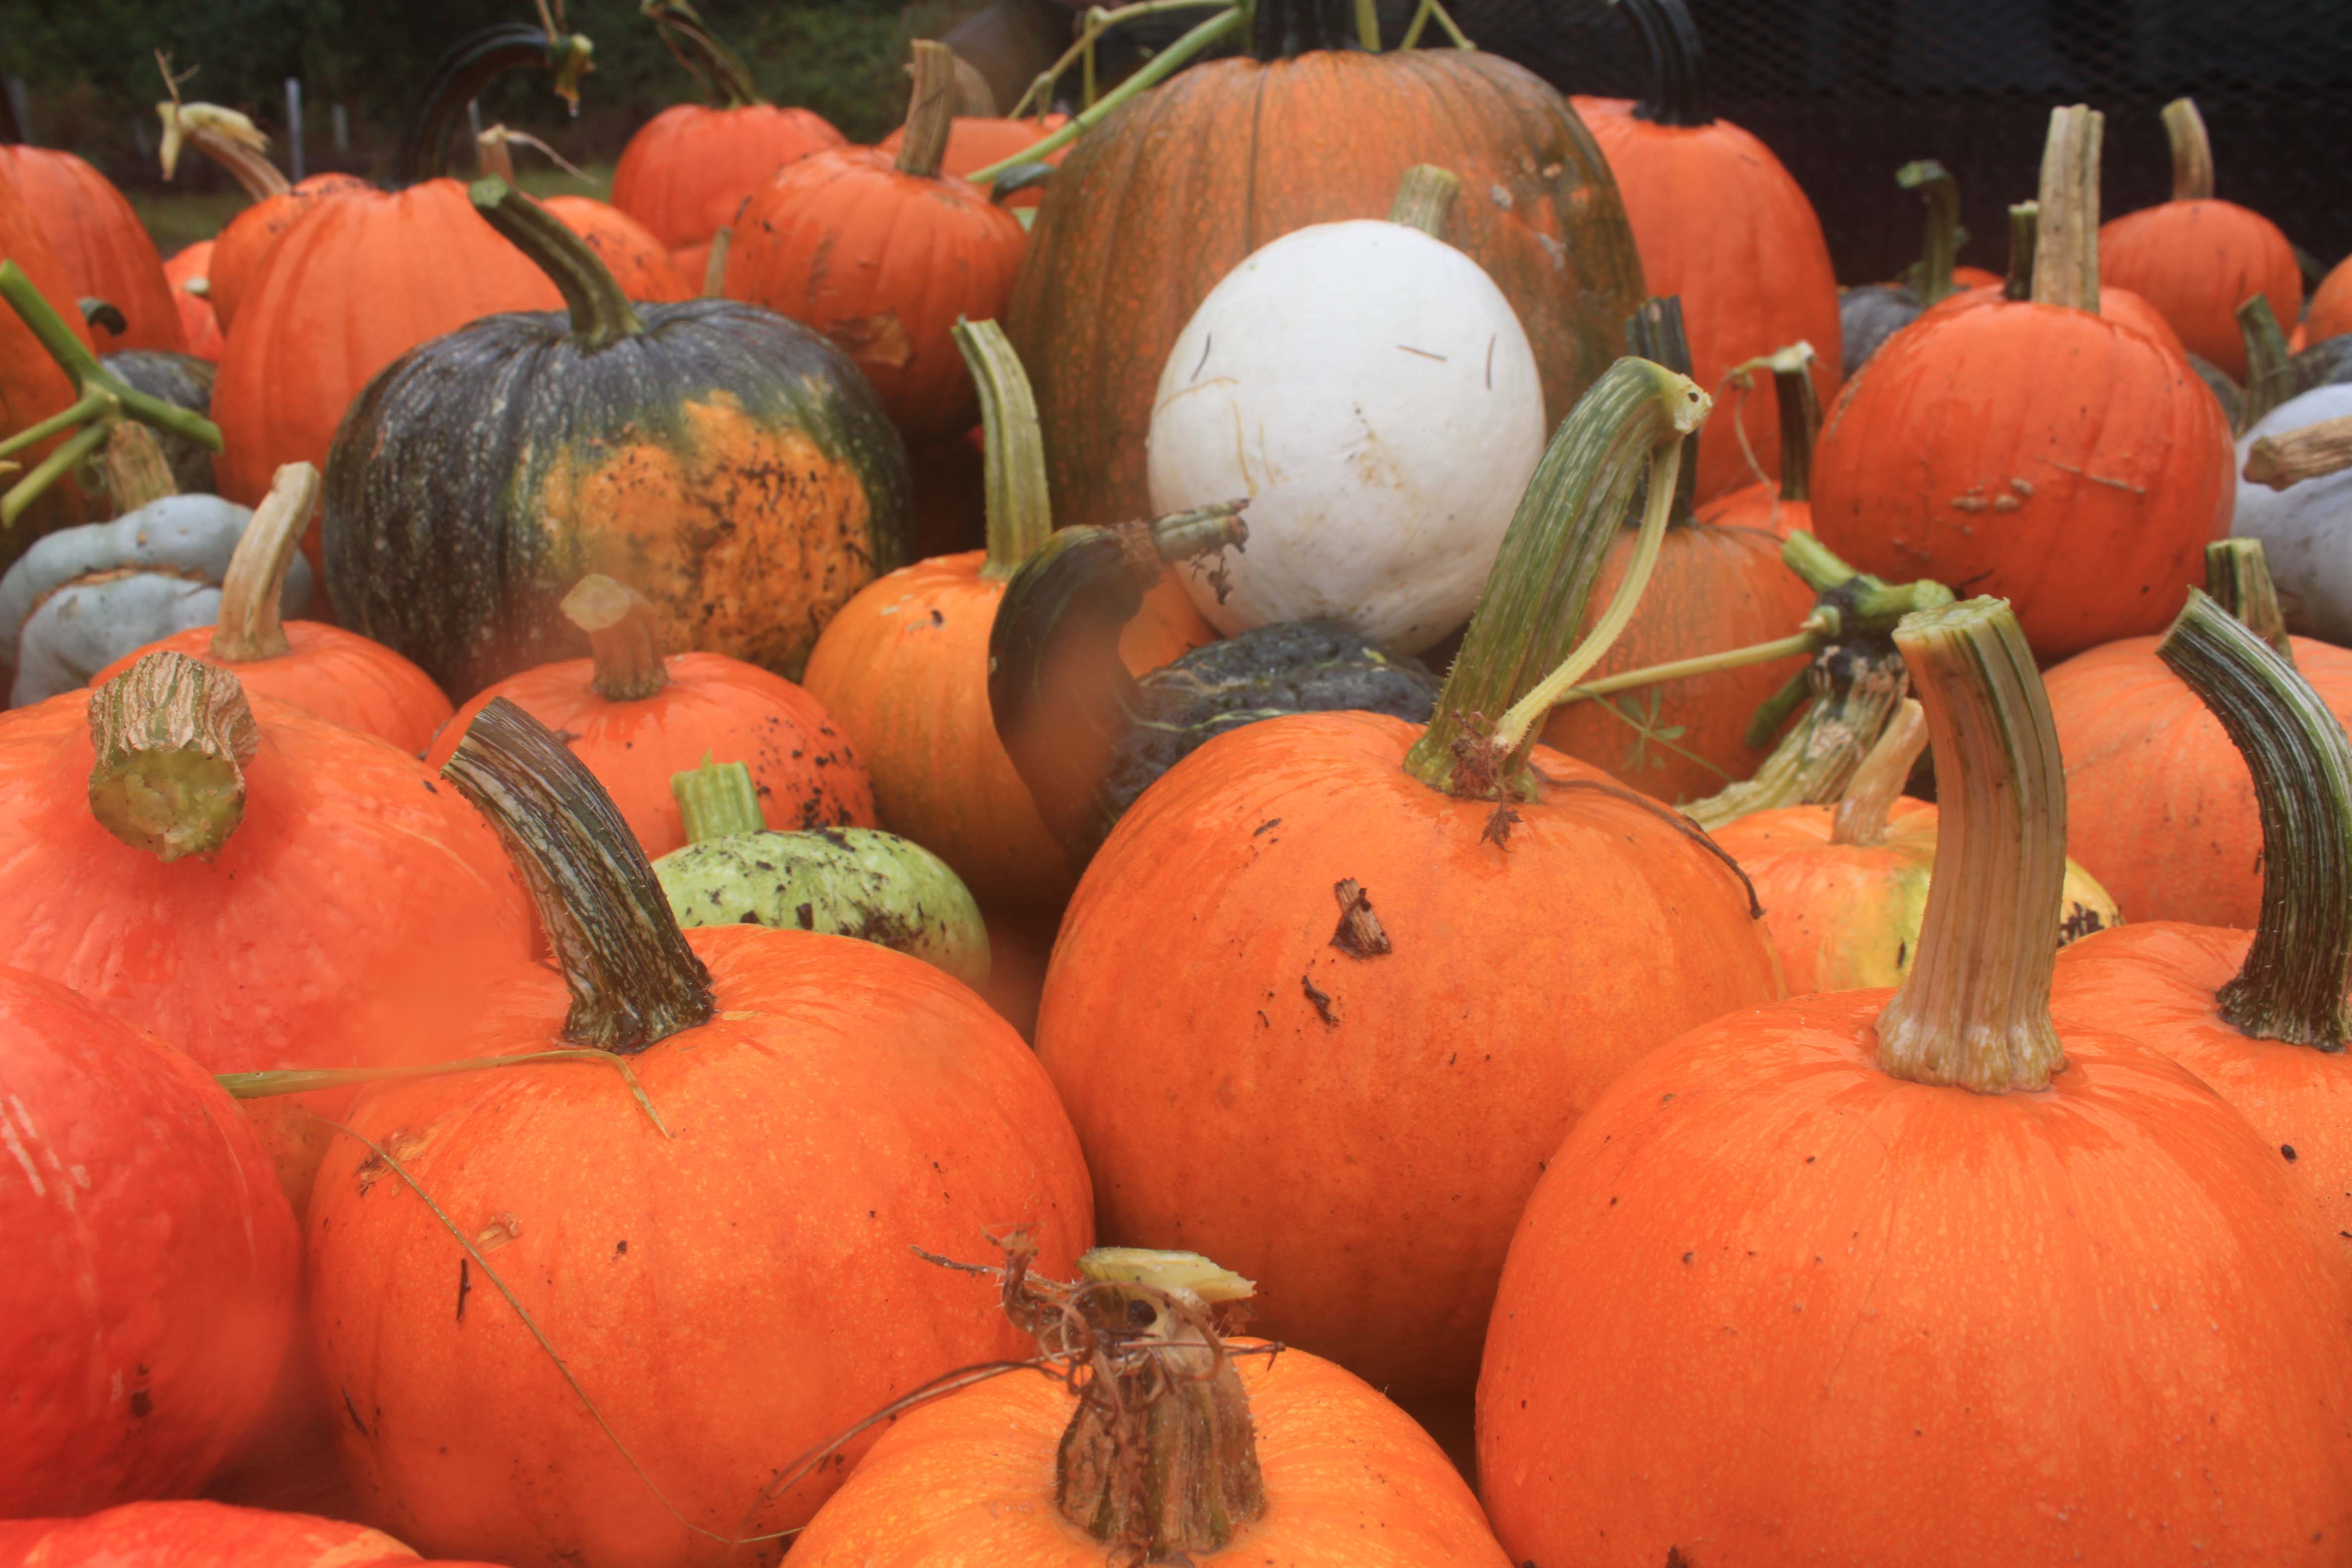 Trek-grown pumpkins ready to feed to animals over winter.